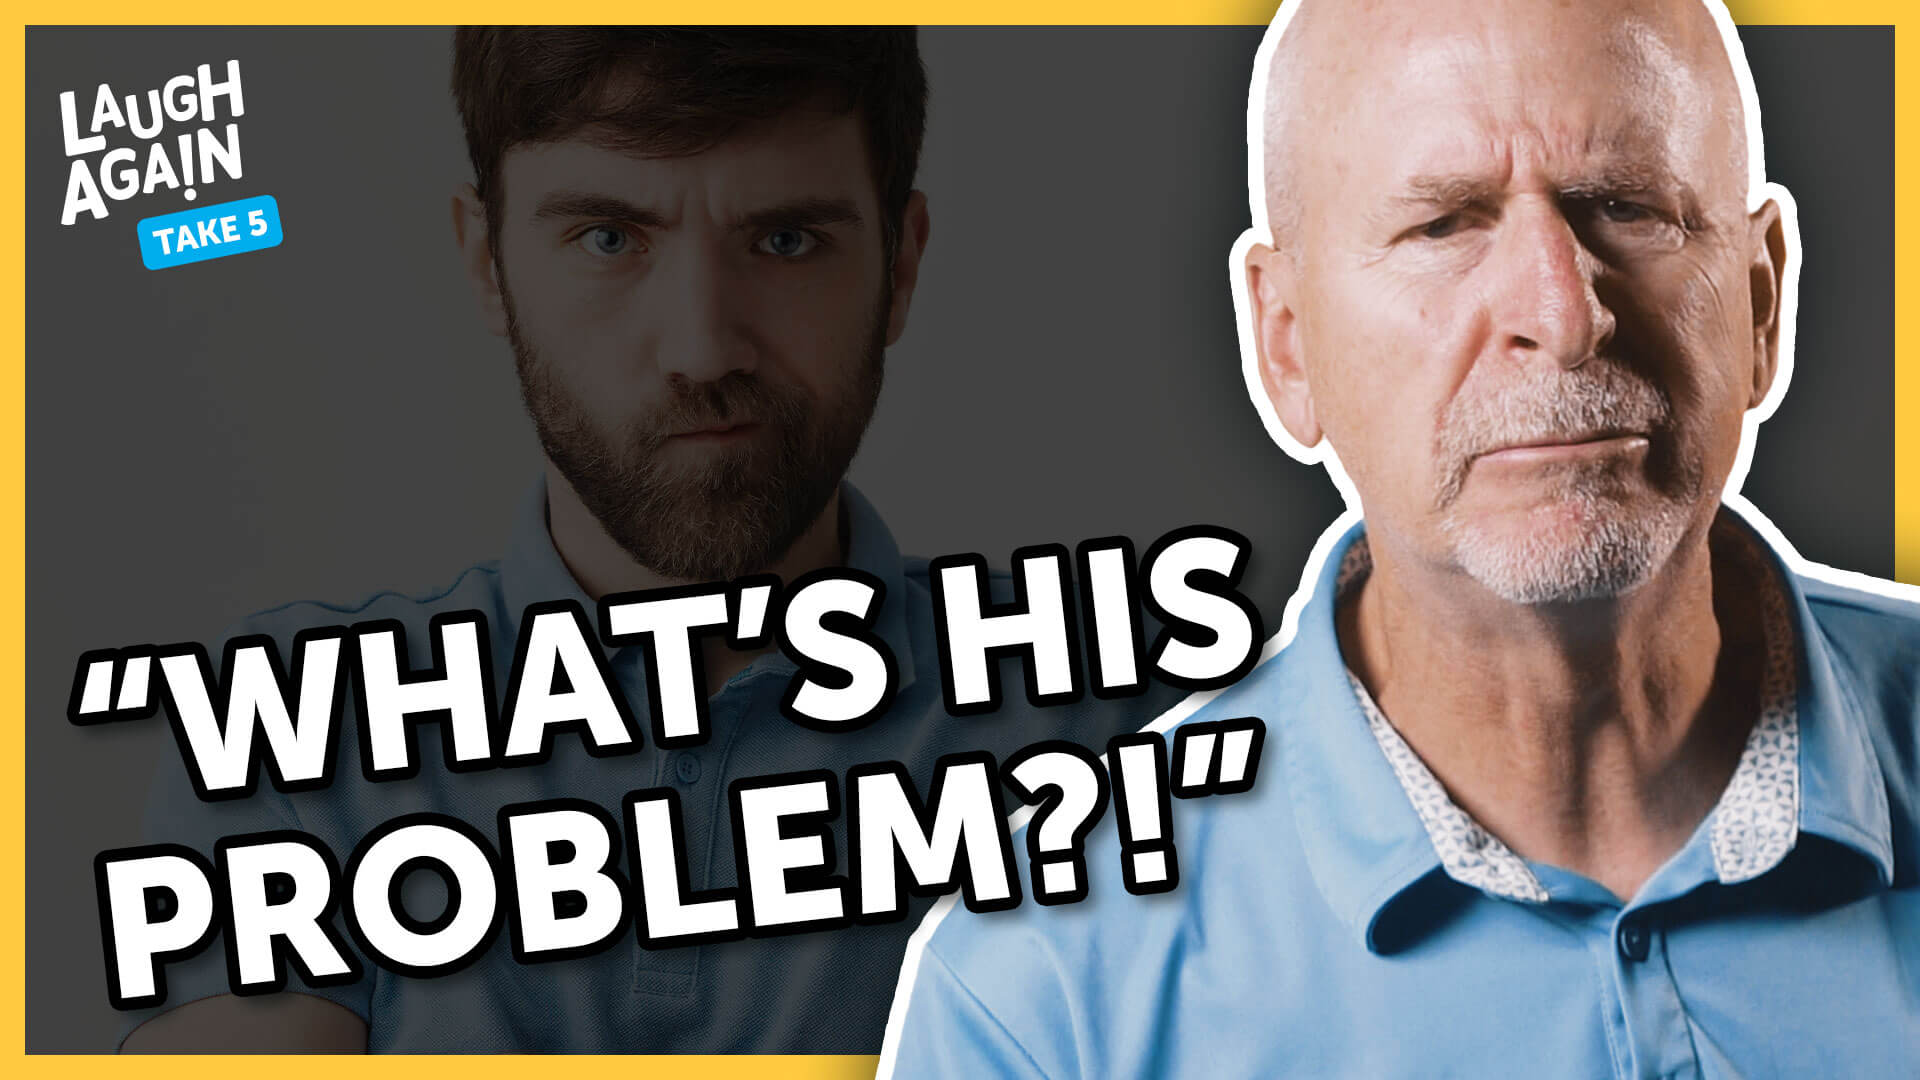 5 Tips for Grumpy People | Laugh Again Take 5 with Phil Callaway